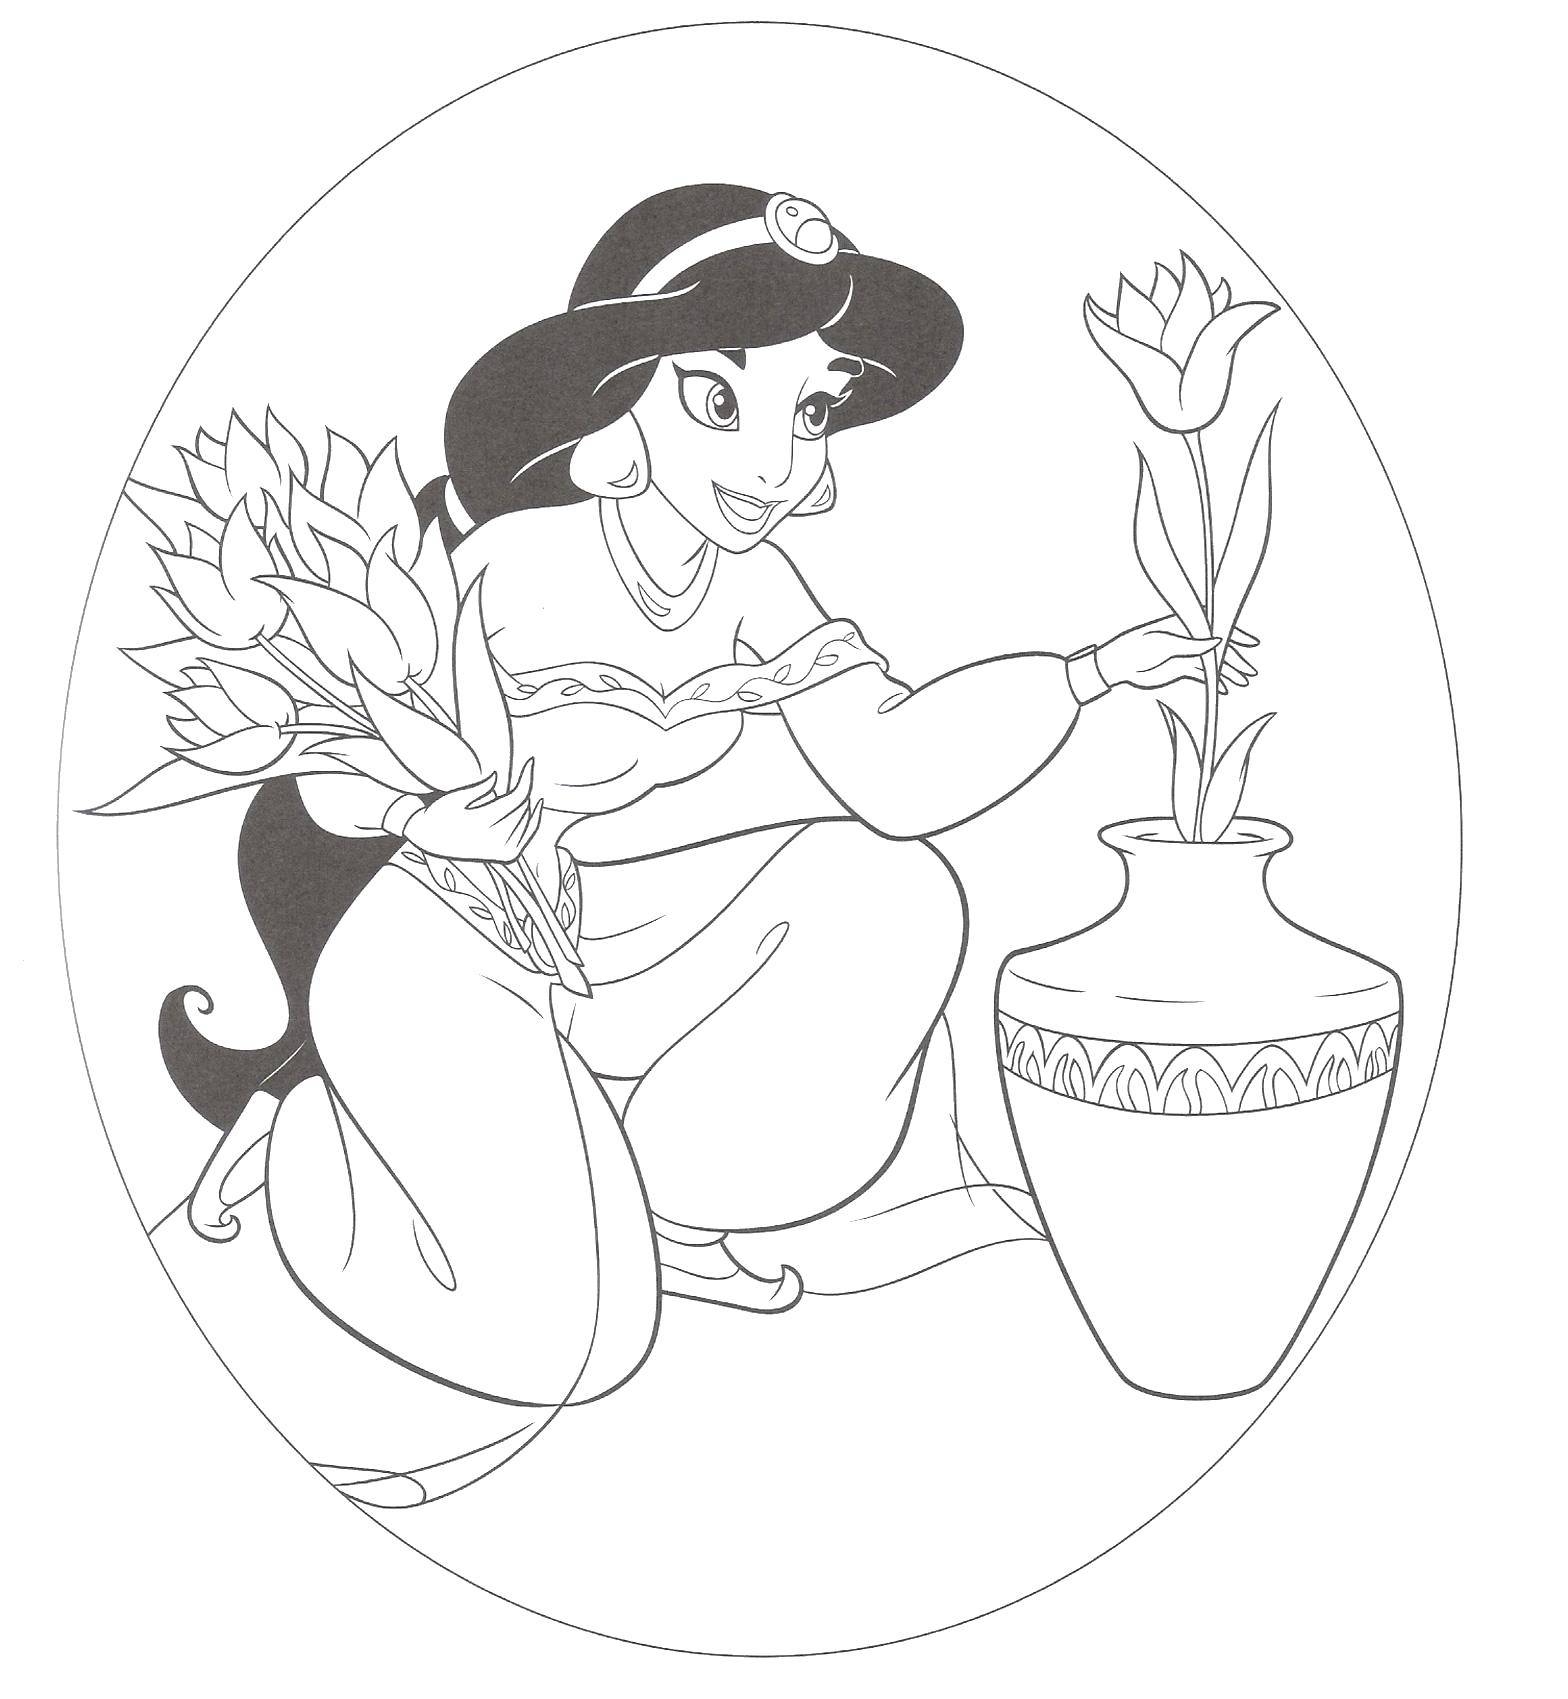 Coloring Beautiful Jasmine. Category Disney coloring pages. Tags:  Disney, Aladdin, Jasmine.